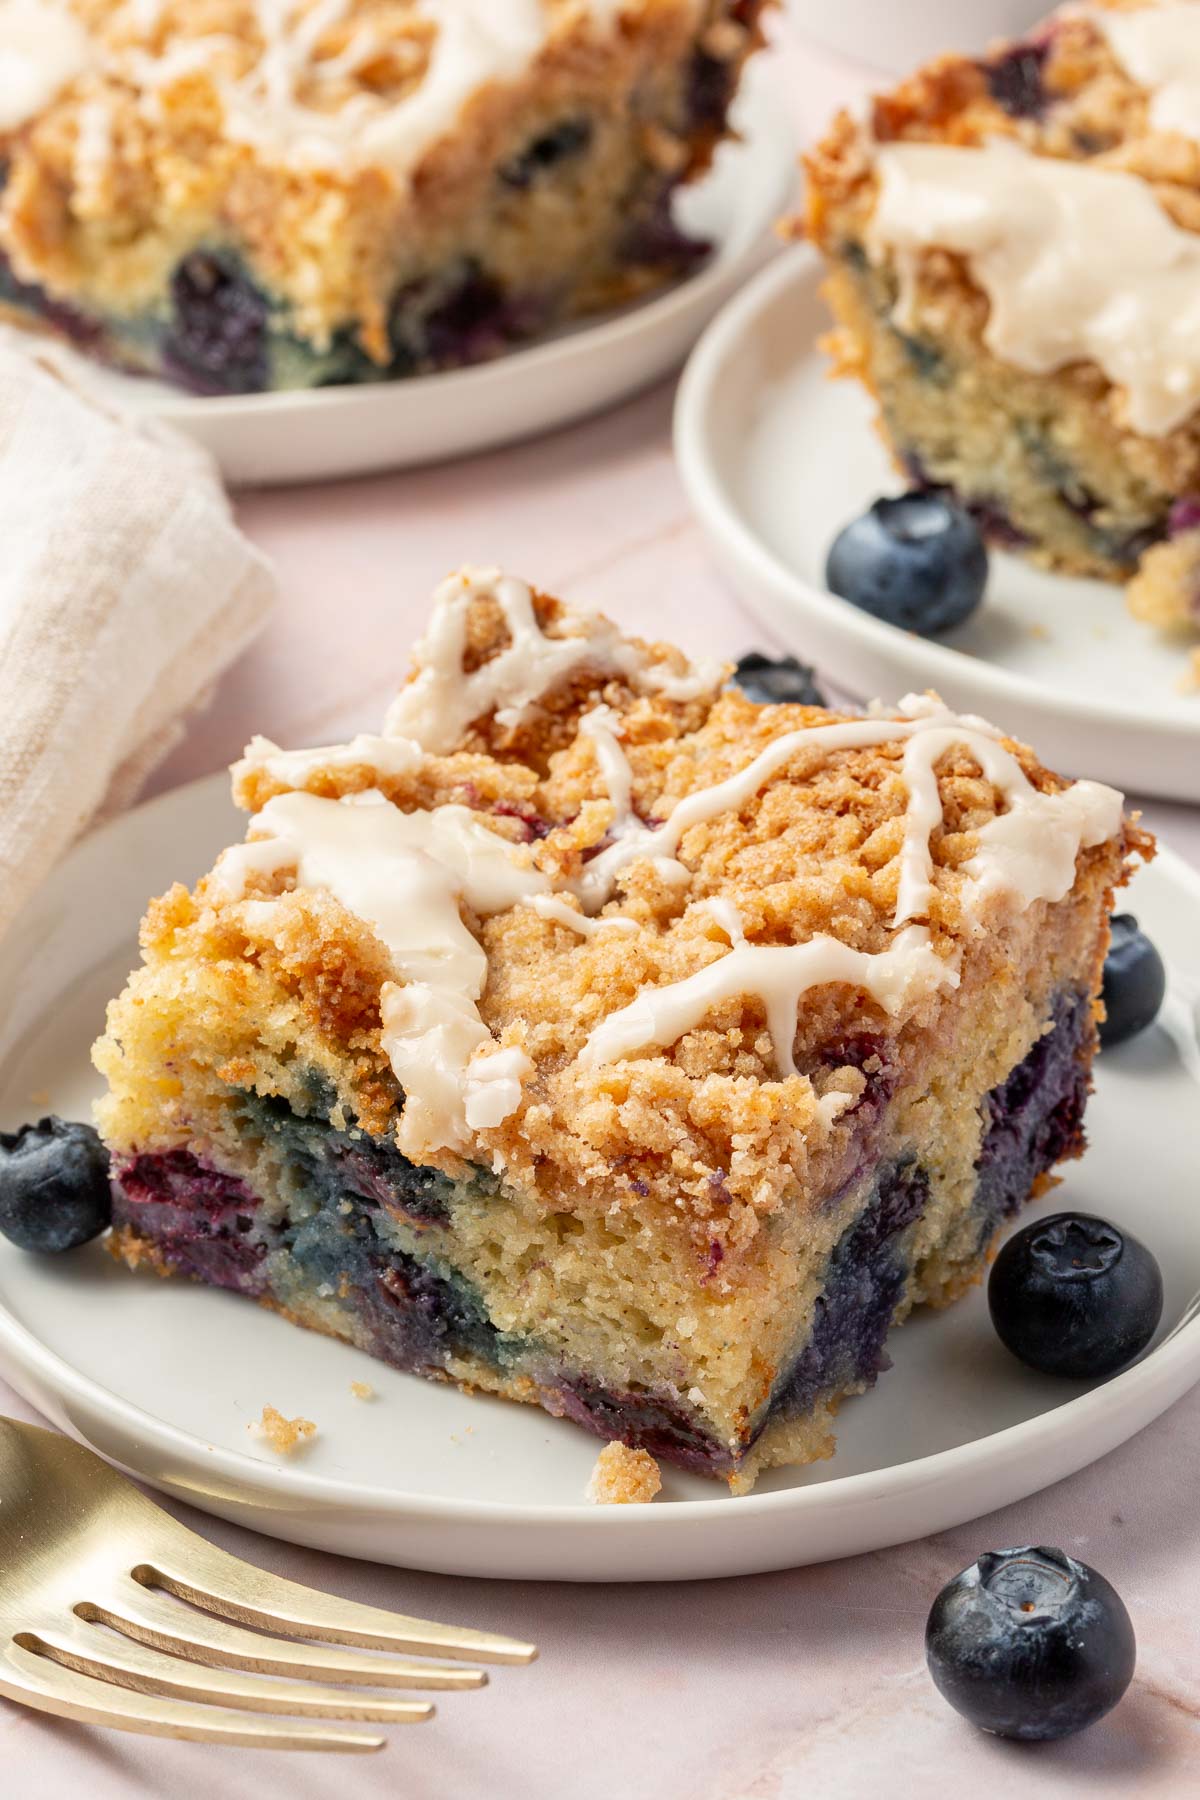 A slice of gluten-free blueberry coffee cake with streusel and glaze on a dessert plate with two more slices behind it.